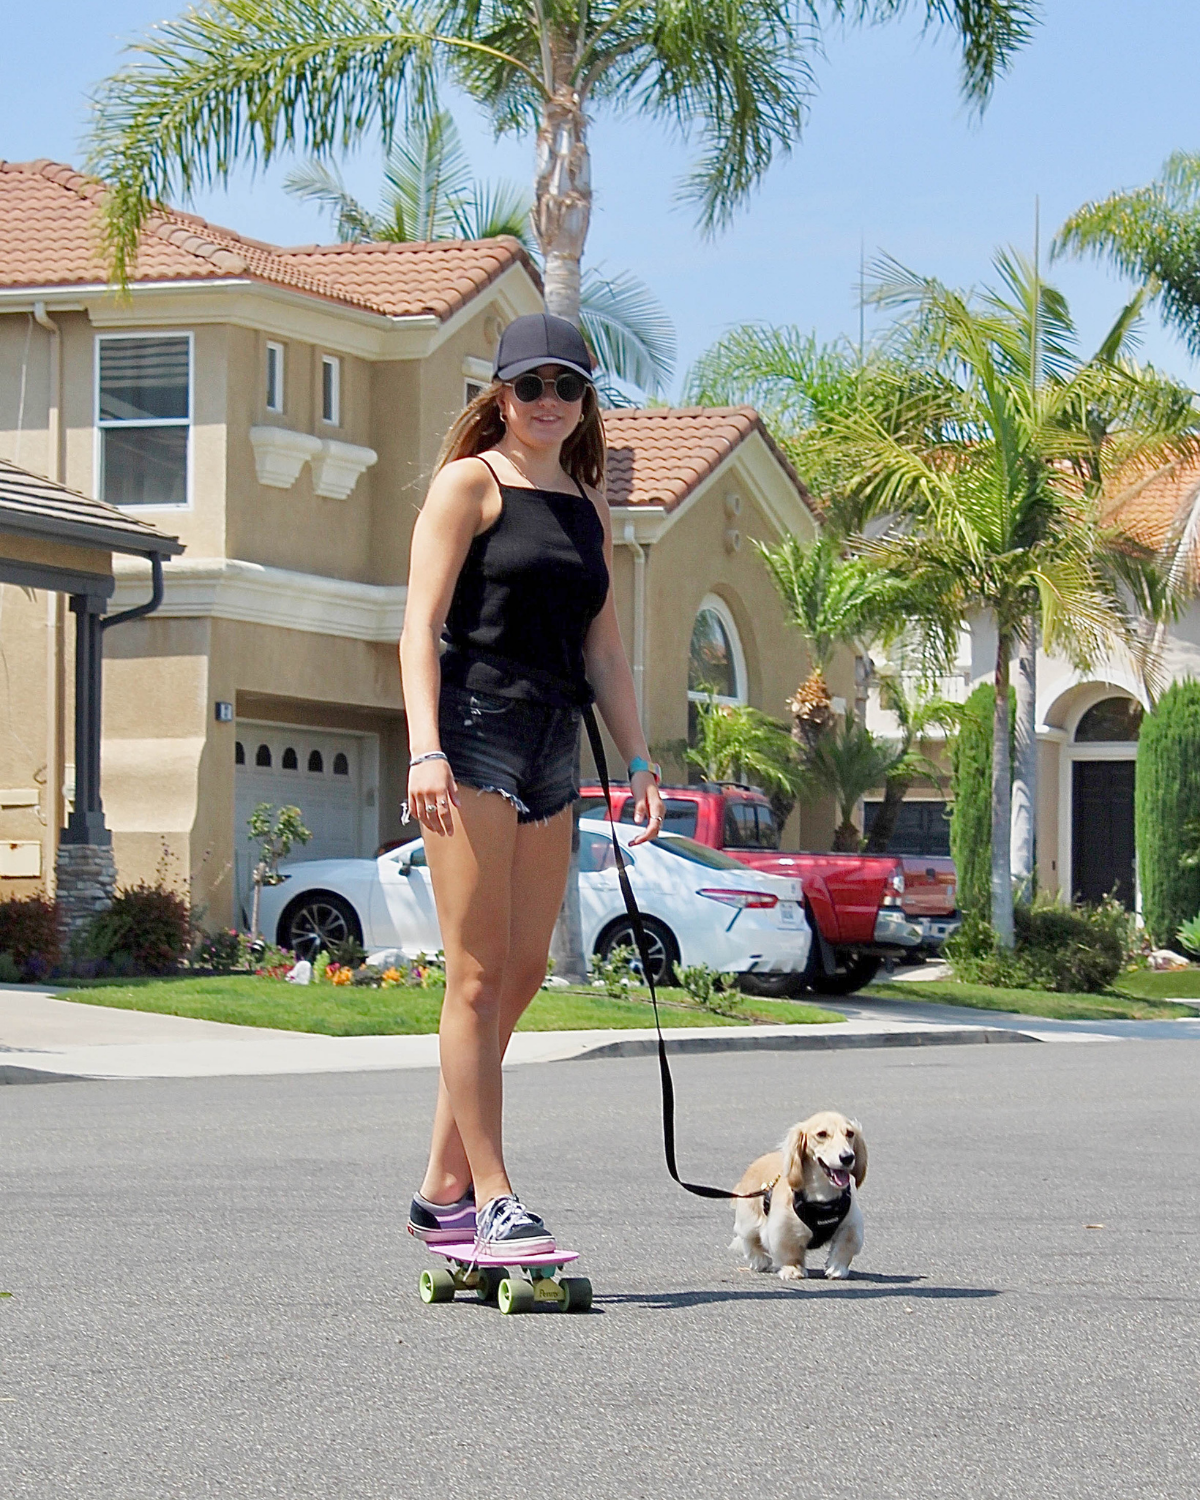 Hands-free is the way to be! Adjust your multifunctional dog leash for around-the-waist wear and hands-free functionality - djangobrand.com